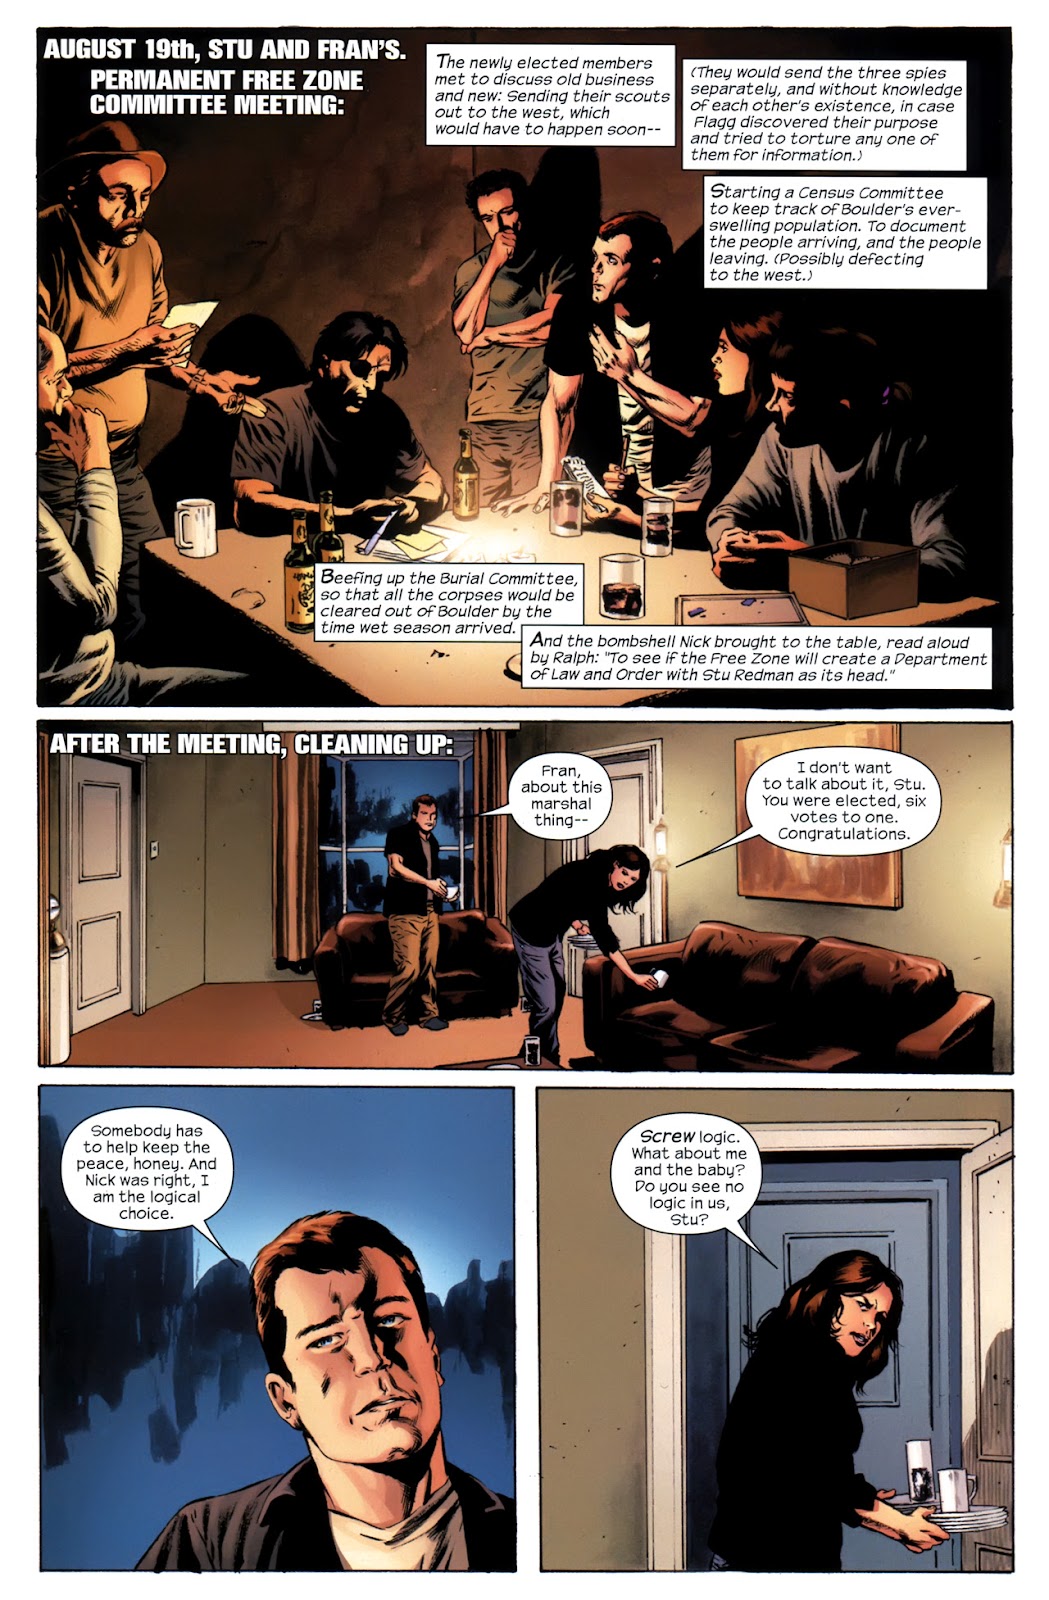 The Stand: No Man's Land issue 1 - Page 16